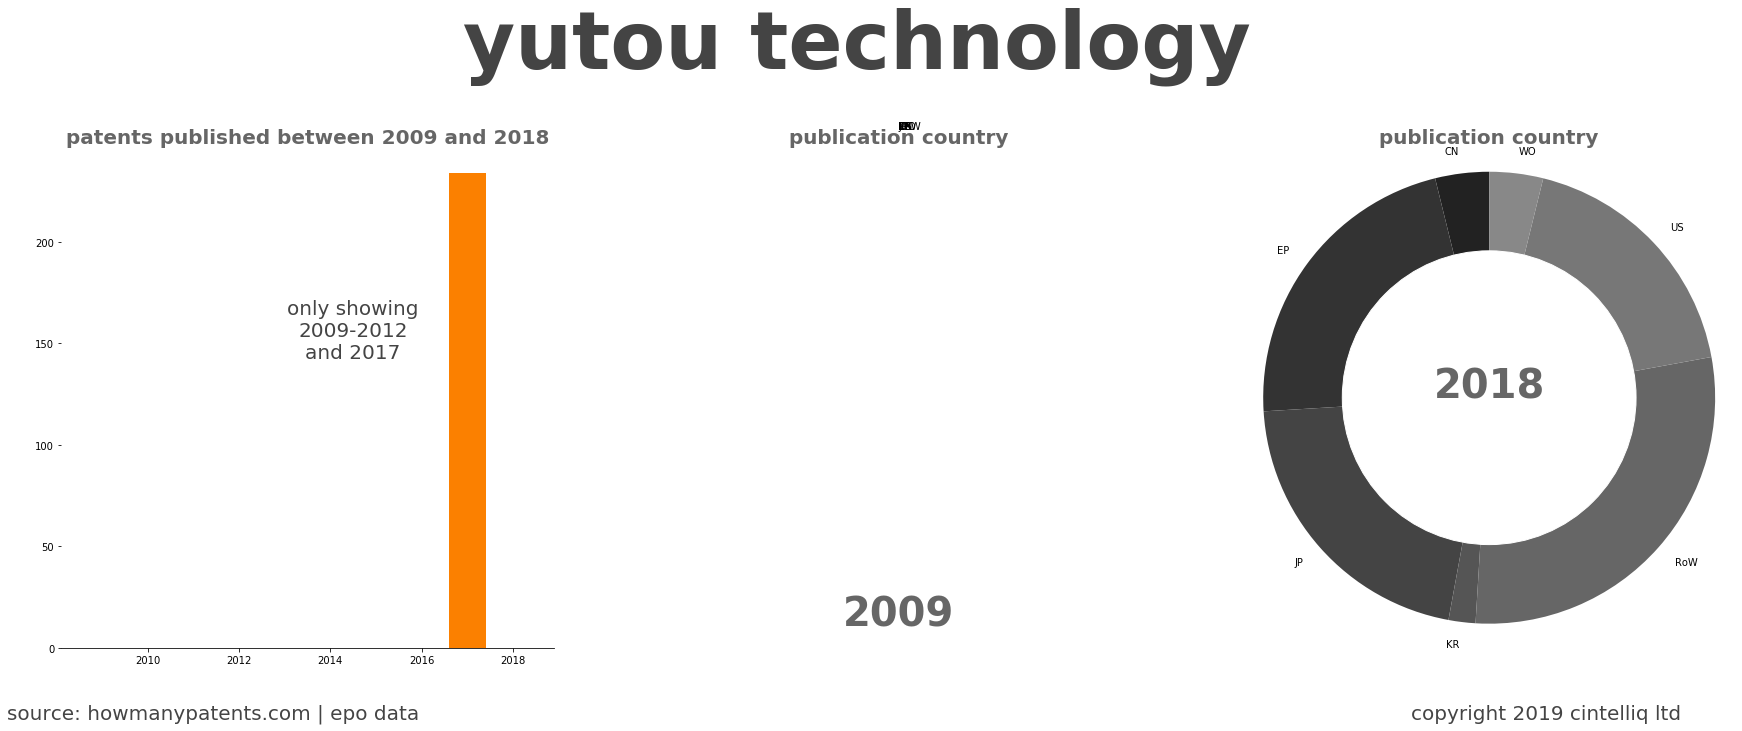 summary of patents for Yutou Technology 